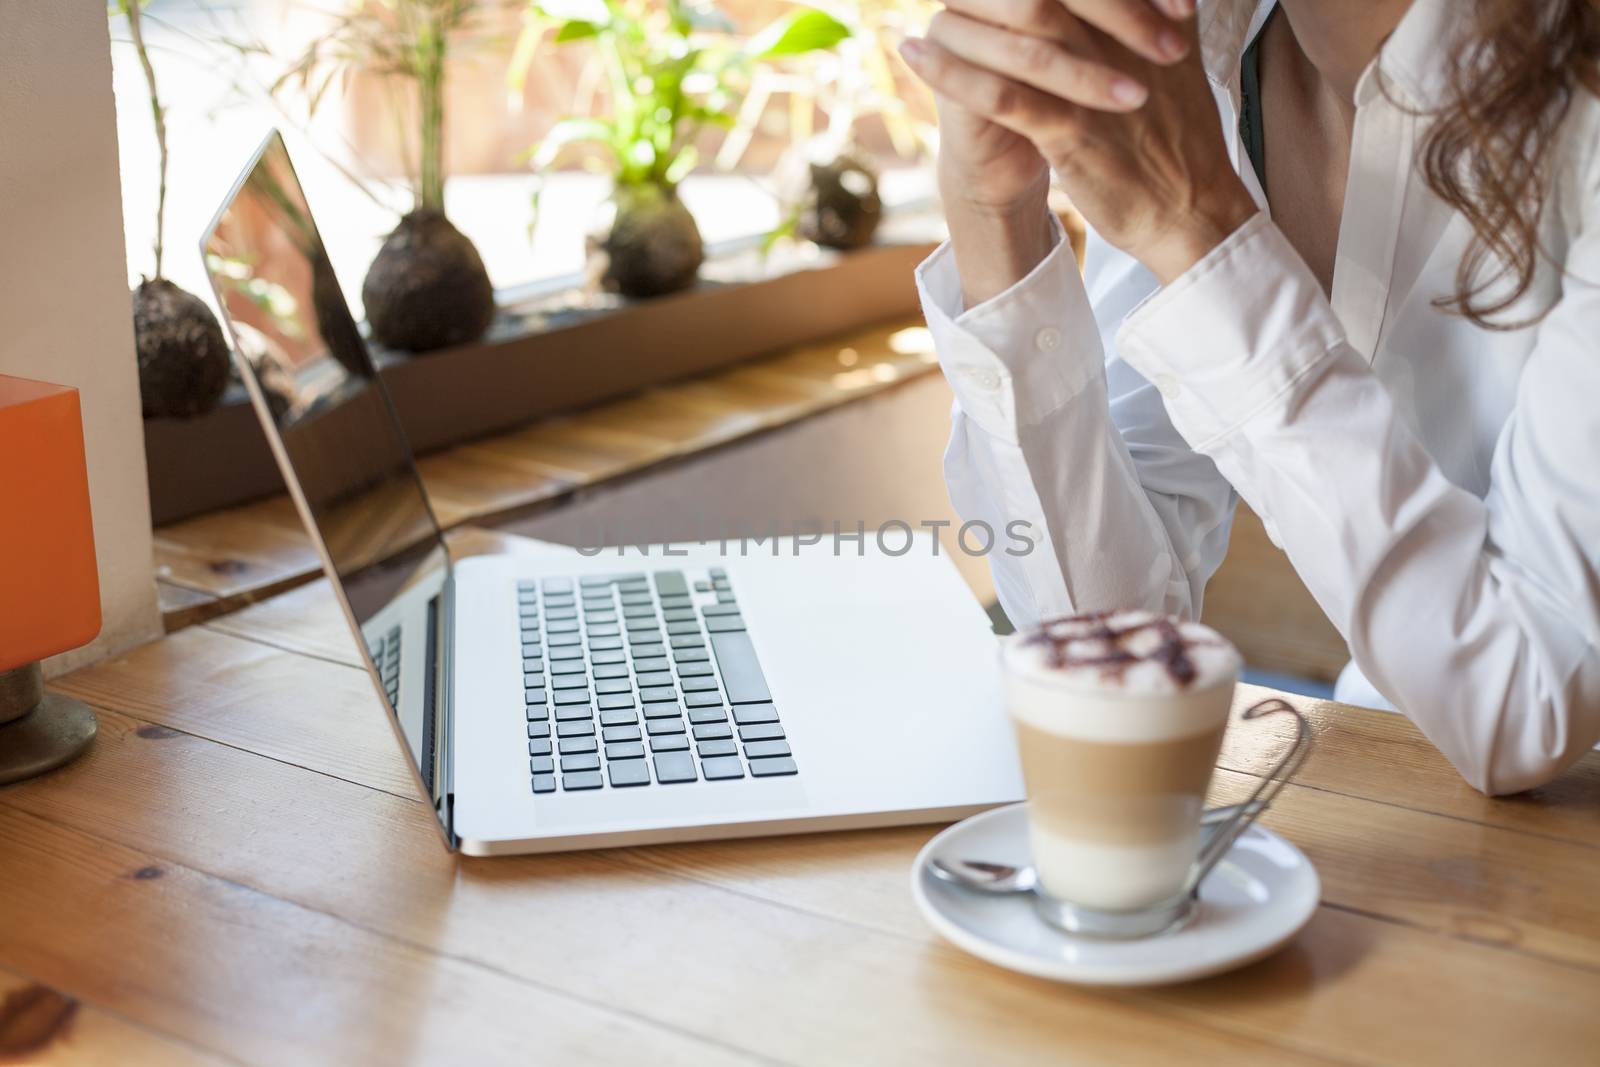 woman with white shirt in front of keyboard pc laptop and cappuccino coffee cup ready thinking on light brown wooden table